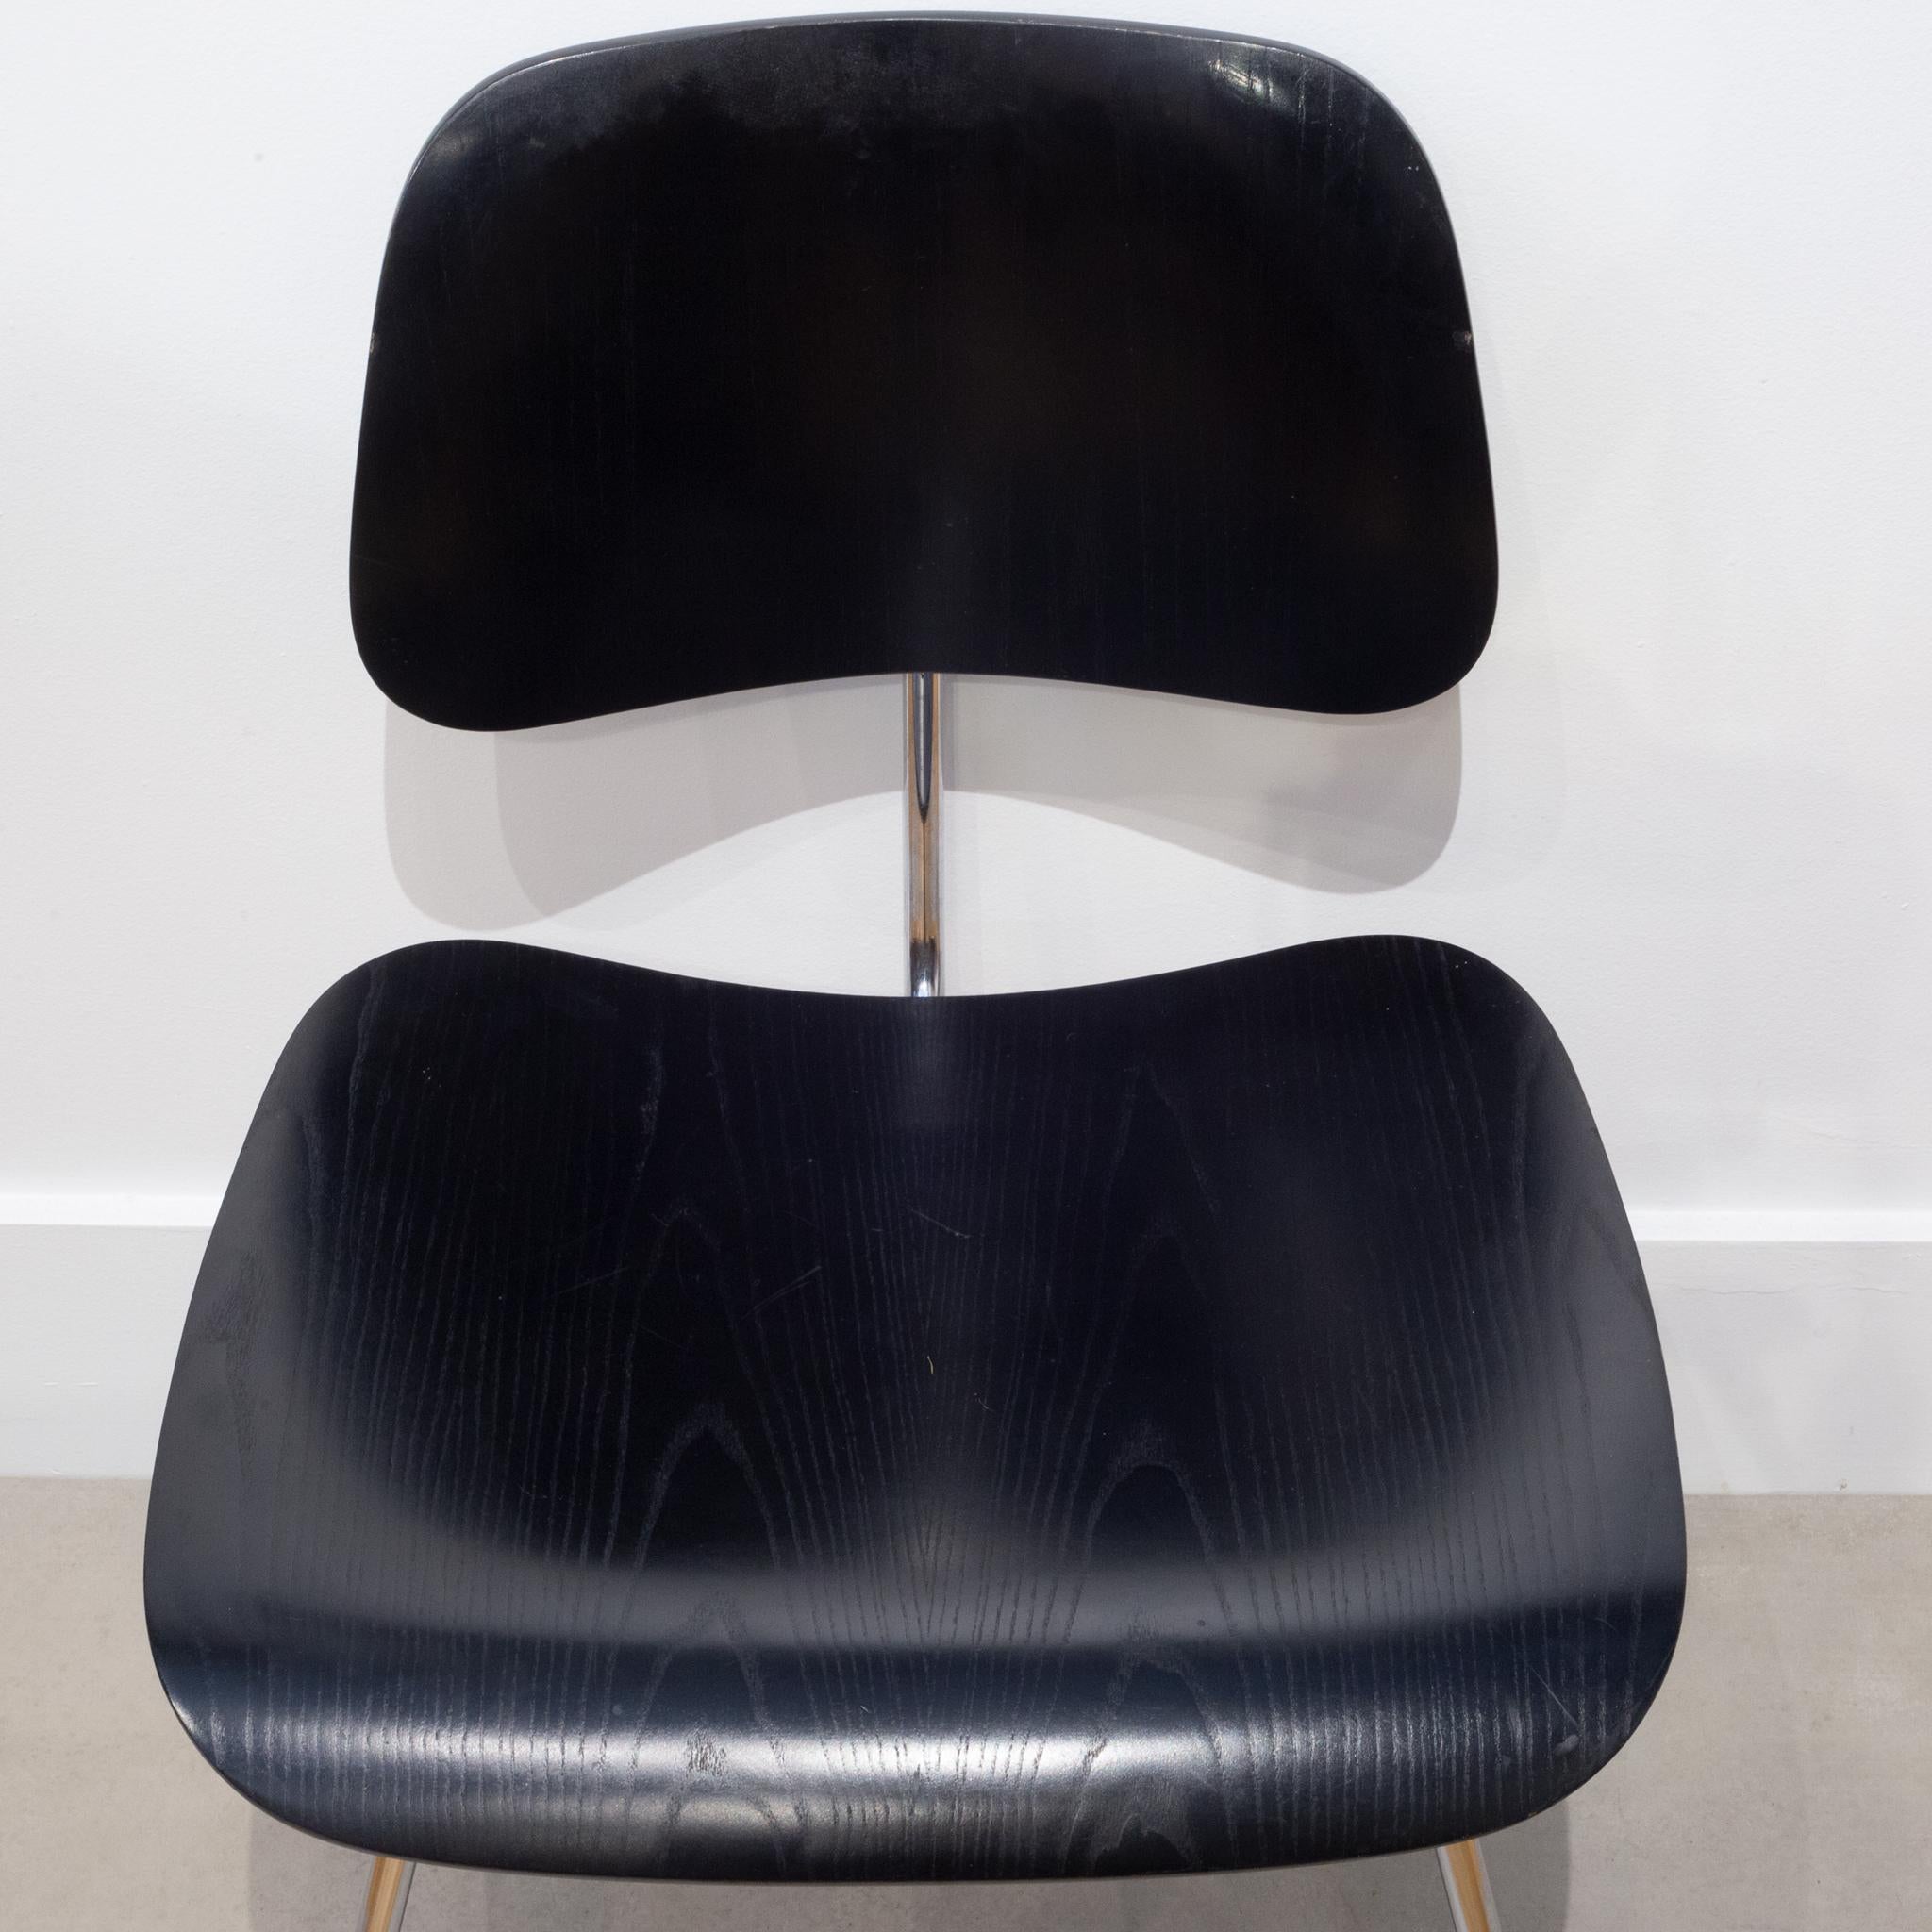 Eames for Herman Miller DCM Chairs in Black-Price is Per Chair 14